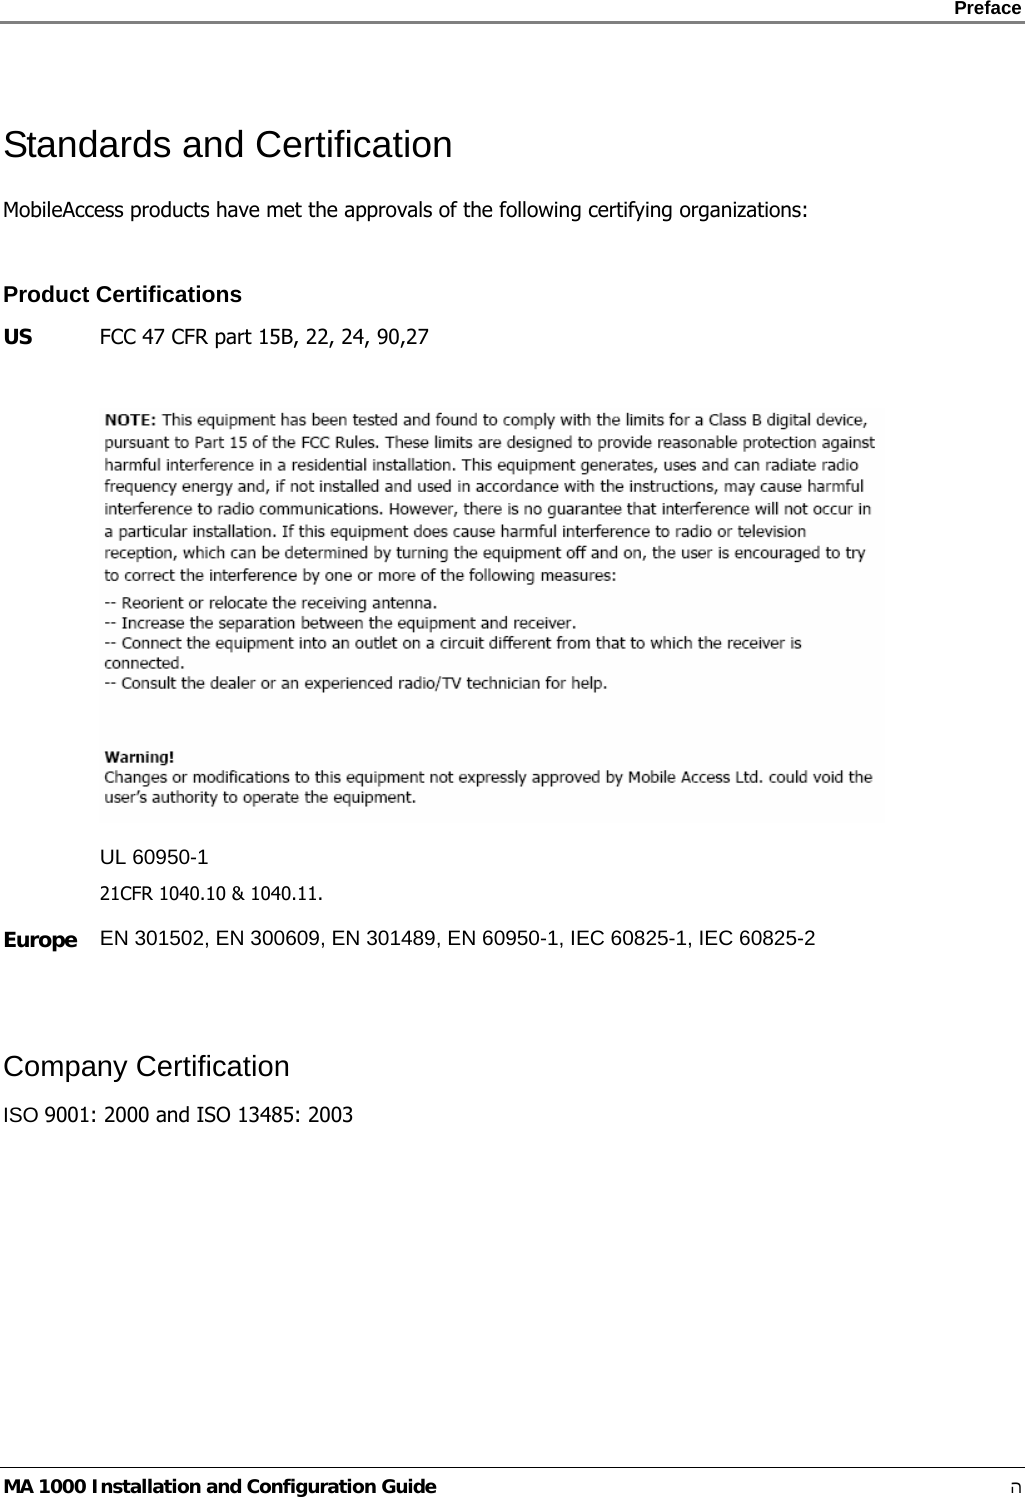    Preface      MA 1000 Installation and Configuration Guide    ה Standards and Certification MobileAccess products have met the approvals of the following certifying organizations:  Product Certifications US  FCC 47 CFR part 15B, 22, 24, 90,27   UL 60950-1 21CFR 1040.10 &amp; 1040.11. Europe  EN 301502, EN 300609, EN 301489, EN 60950-1, IEC 60825-1, IEC 60825-2  Company Certification ISO 9001: 2000 and ISO 13485: 2003      